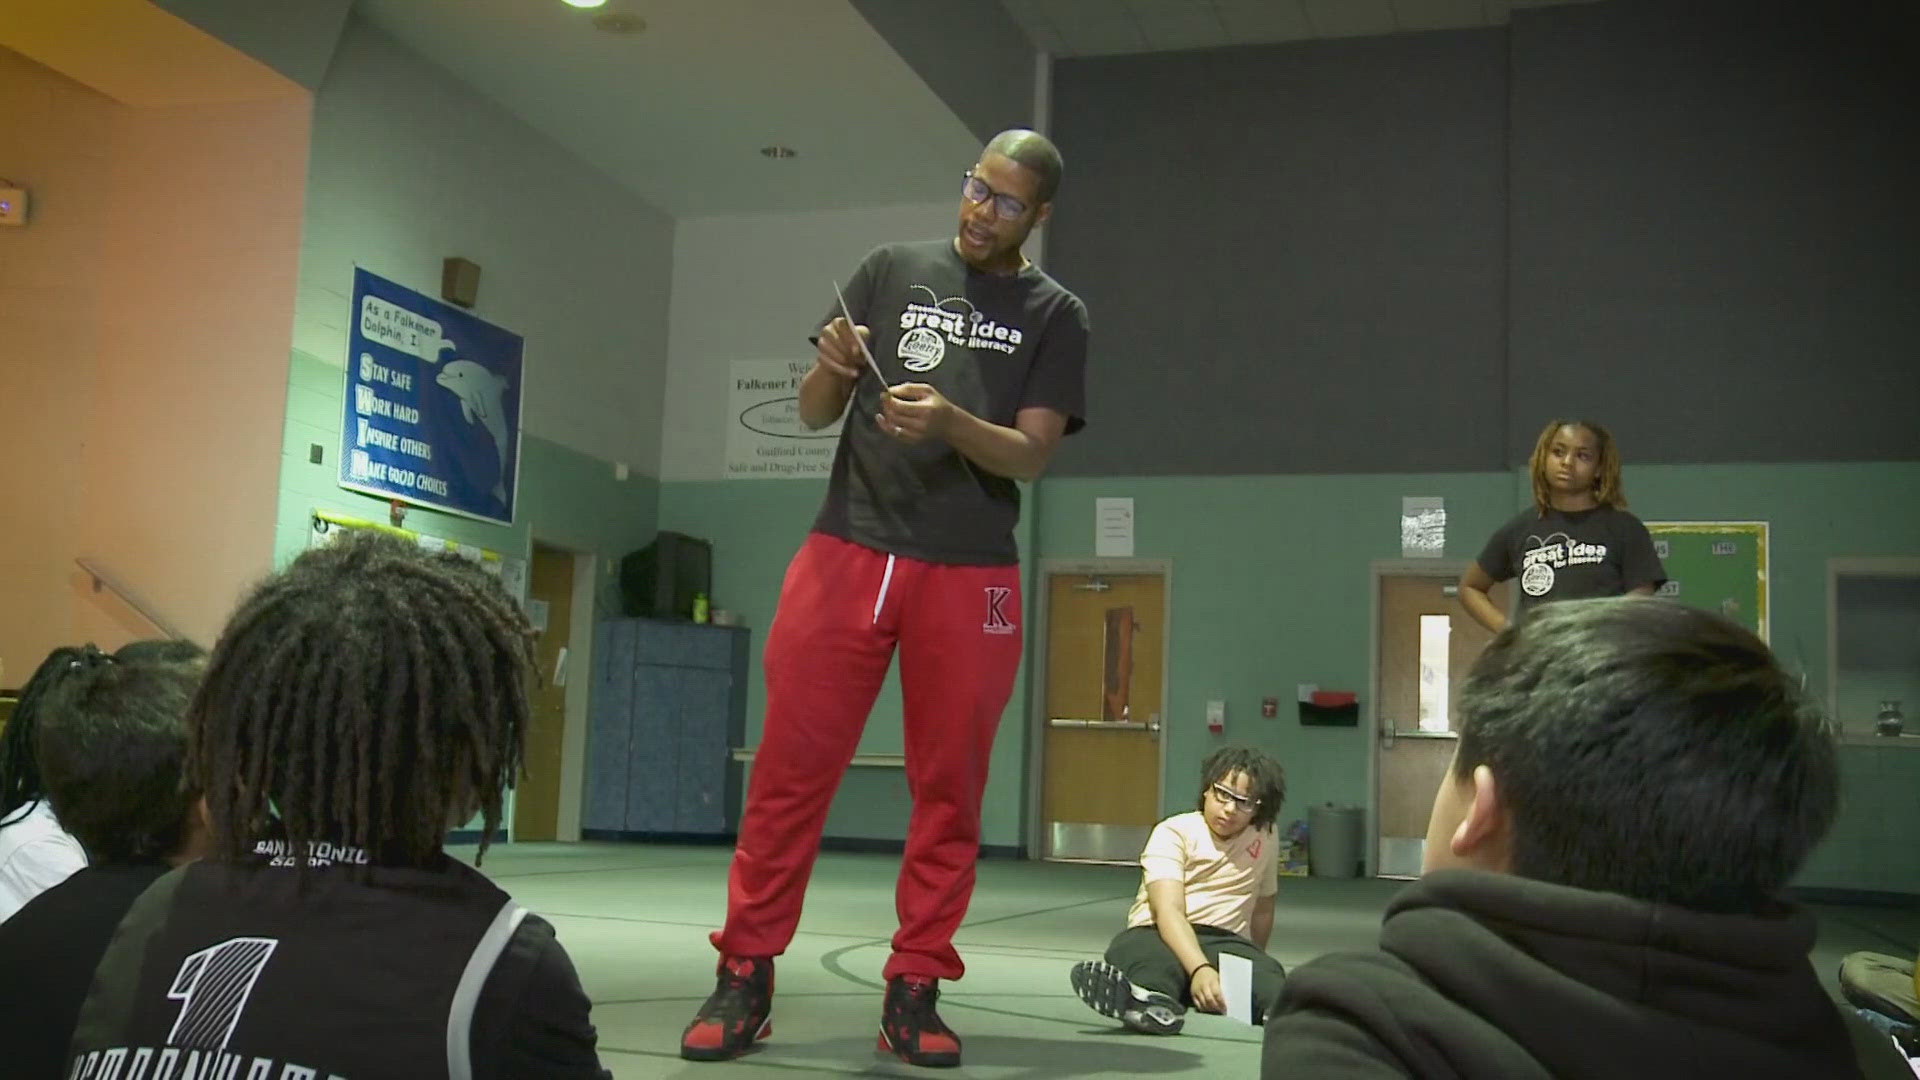 As WFMY News 2 celebrates its diamond birthday, we're celebrating diamonds in our community! This month we spotlight Kids Poetry Basketball founder Clement Mallory.